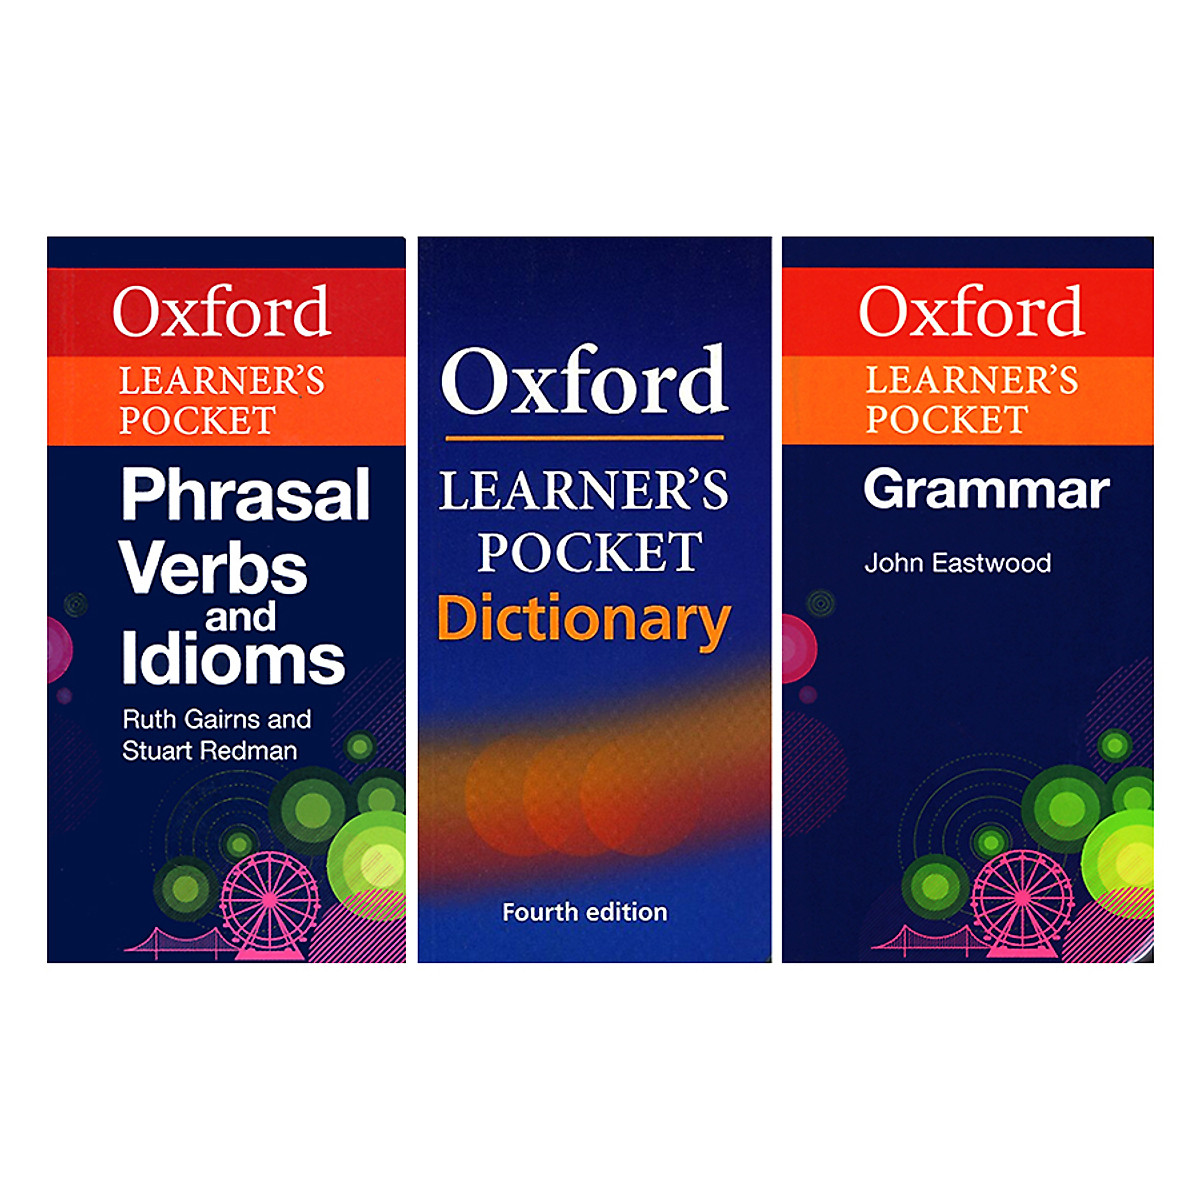 Oxford Learner's Pocket - Better Together Set 2: Dictionary, Grammar, Phrasal Verbs And Idioms